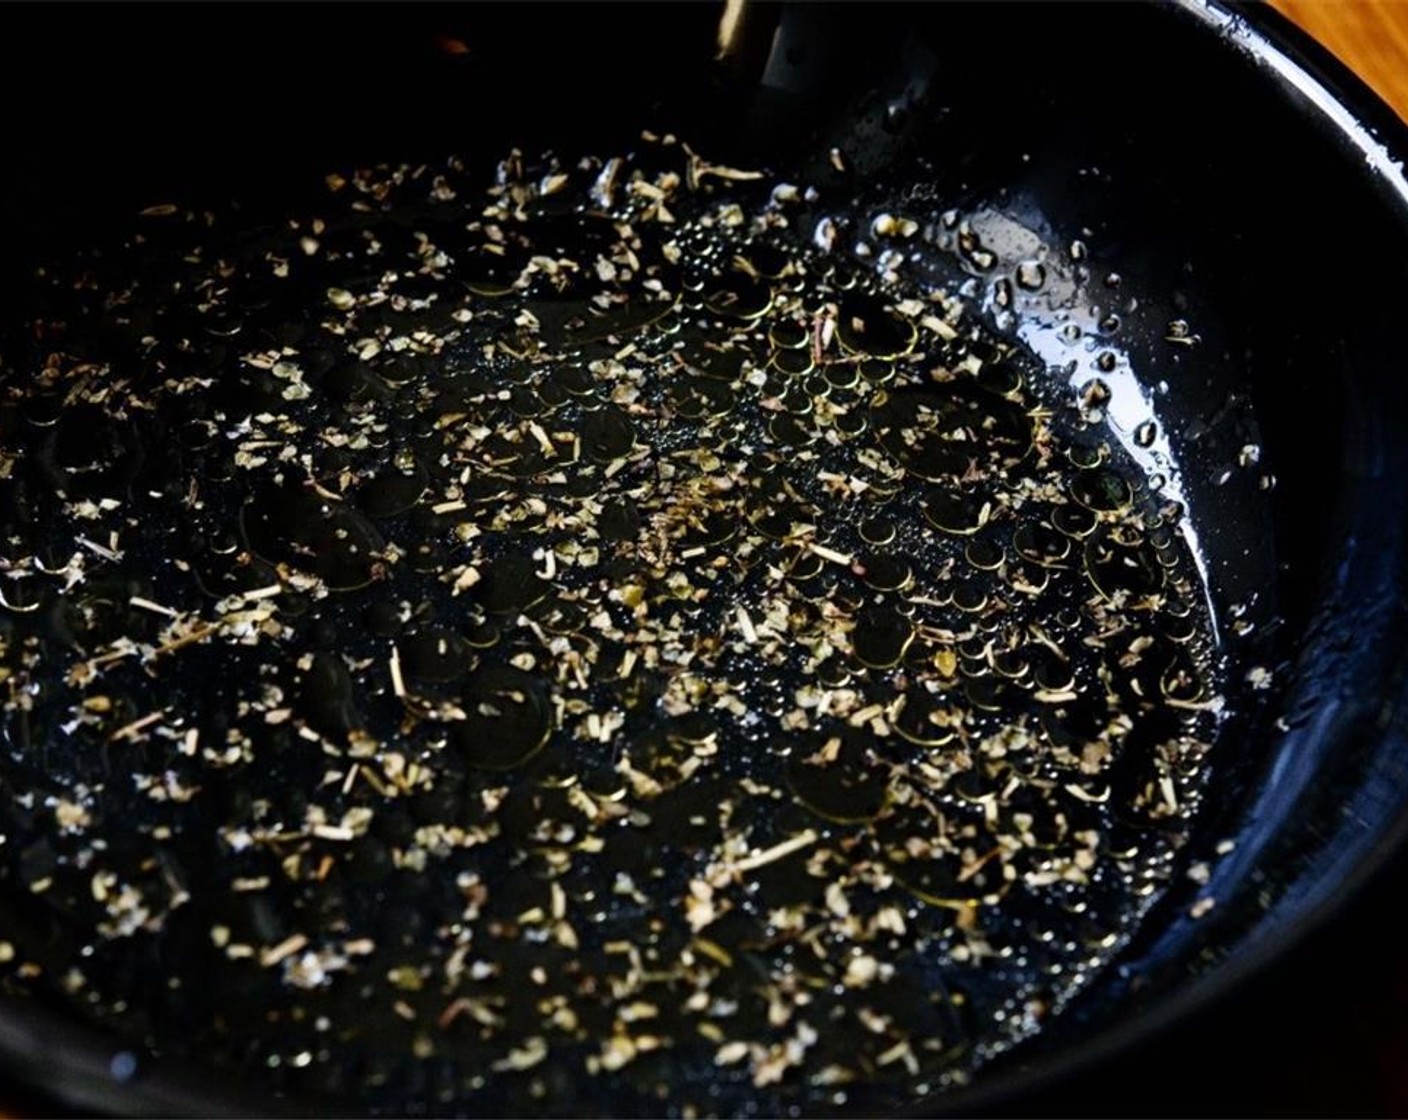 step 3 Combine Extra-Virgin Olive Oil (1 Tbsp), lemon juice, Salt (1/8 tsp), and Dried Mixed Herbs (1 tsp) in a bowl. Stir to mix all of the ingredients together.